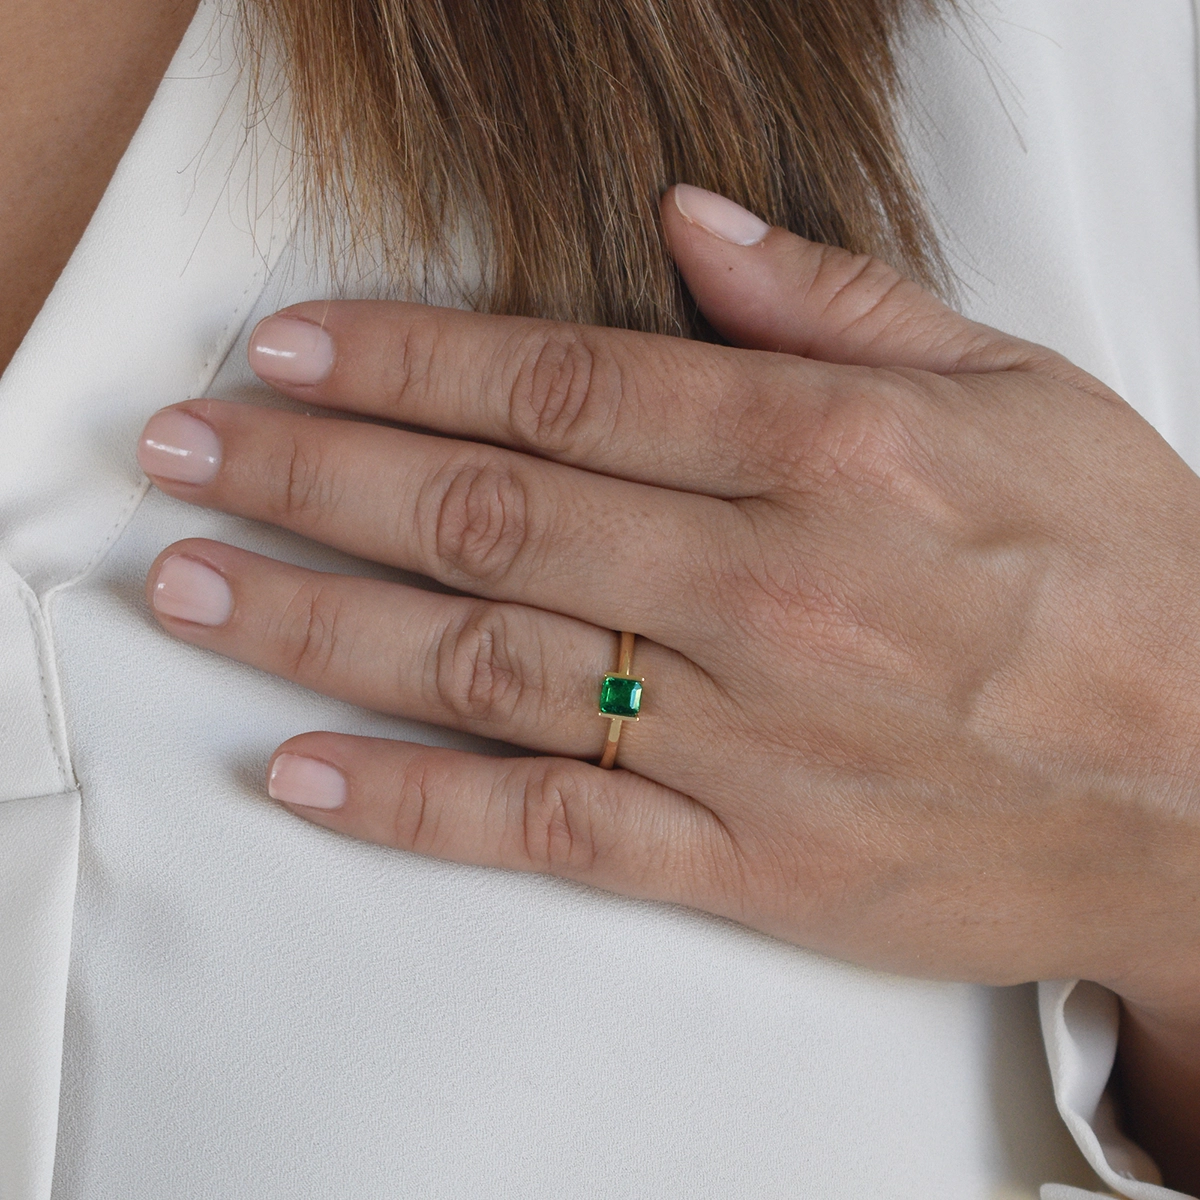 The ring's simple design focuses entirely on the emerald, highlighting its uniqueness and elegance. The solo-stone setting lets the emerald's natural characteristics shine